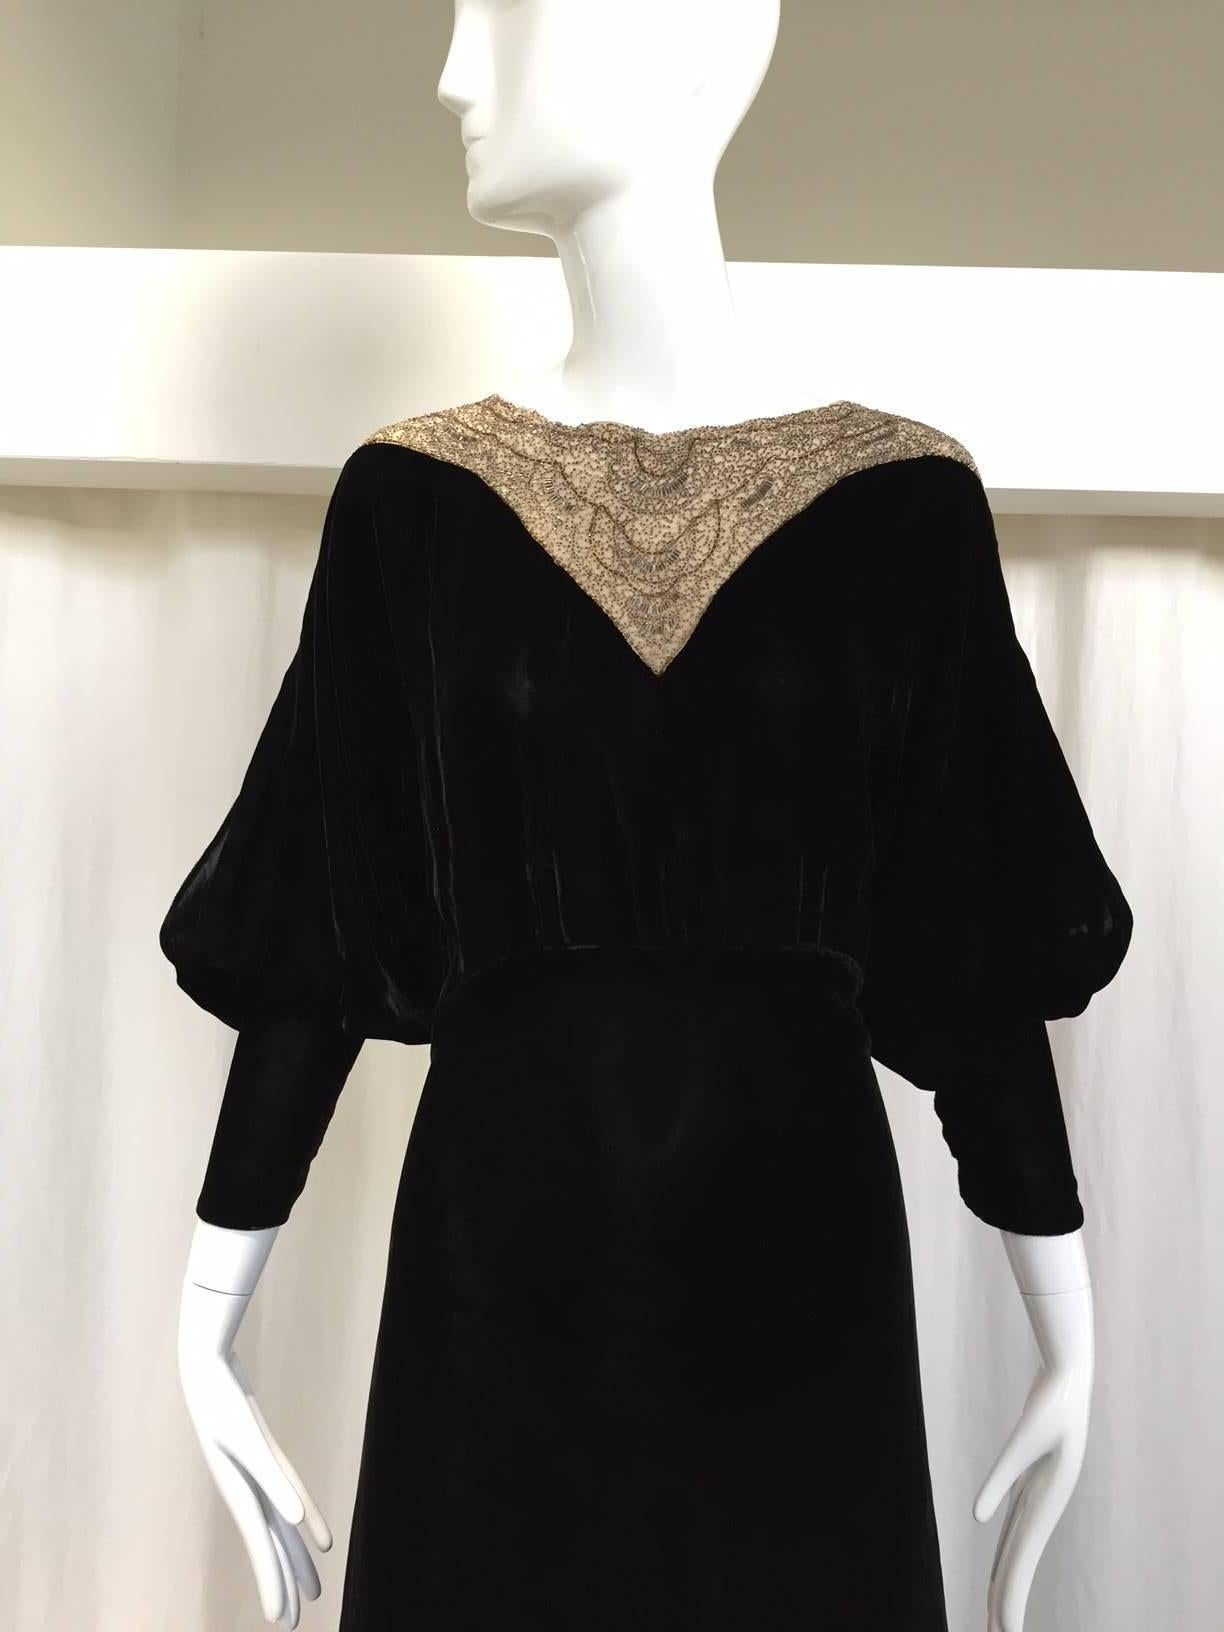 Elegant old hollywood 1930s black velvet gown with beaded collar. Long sleeve with small cut out. 
Fit size US 6/8
Measurement: 36